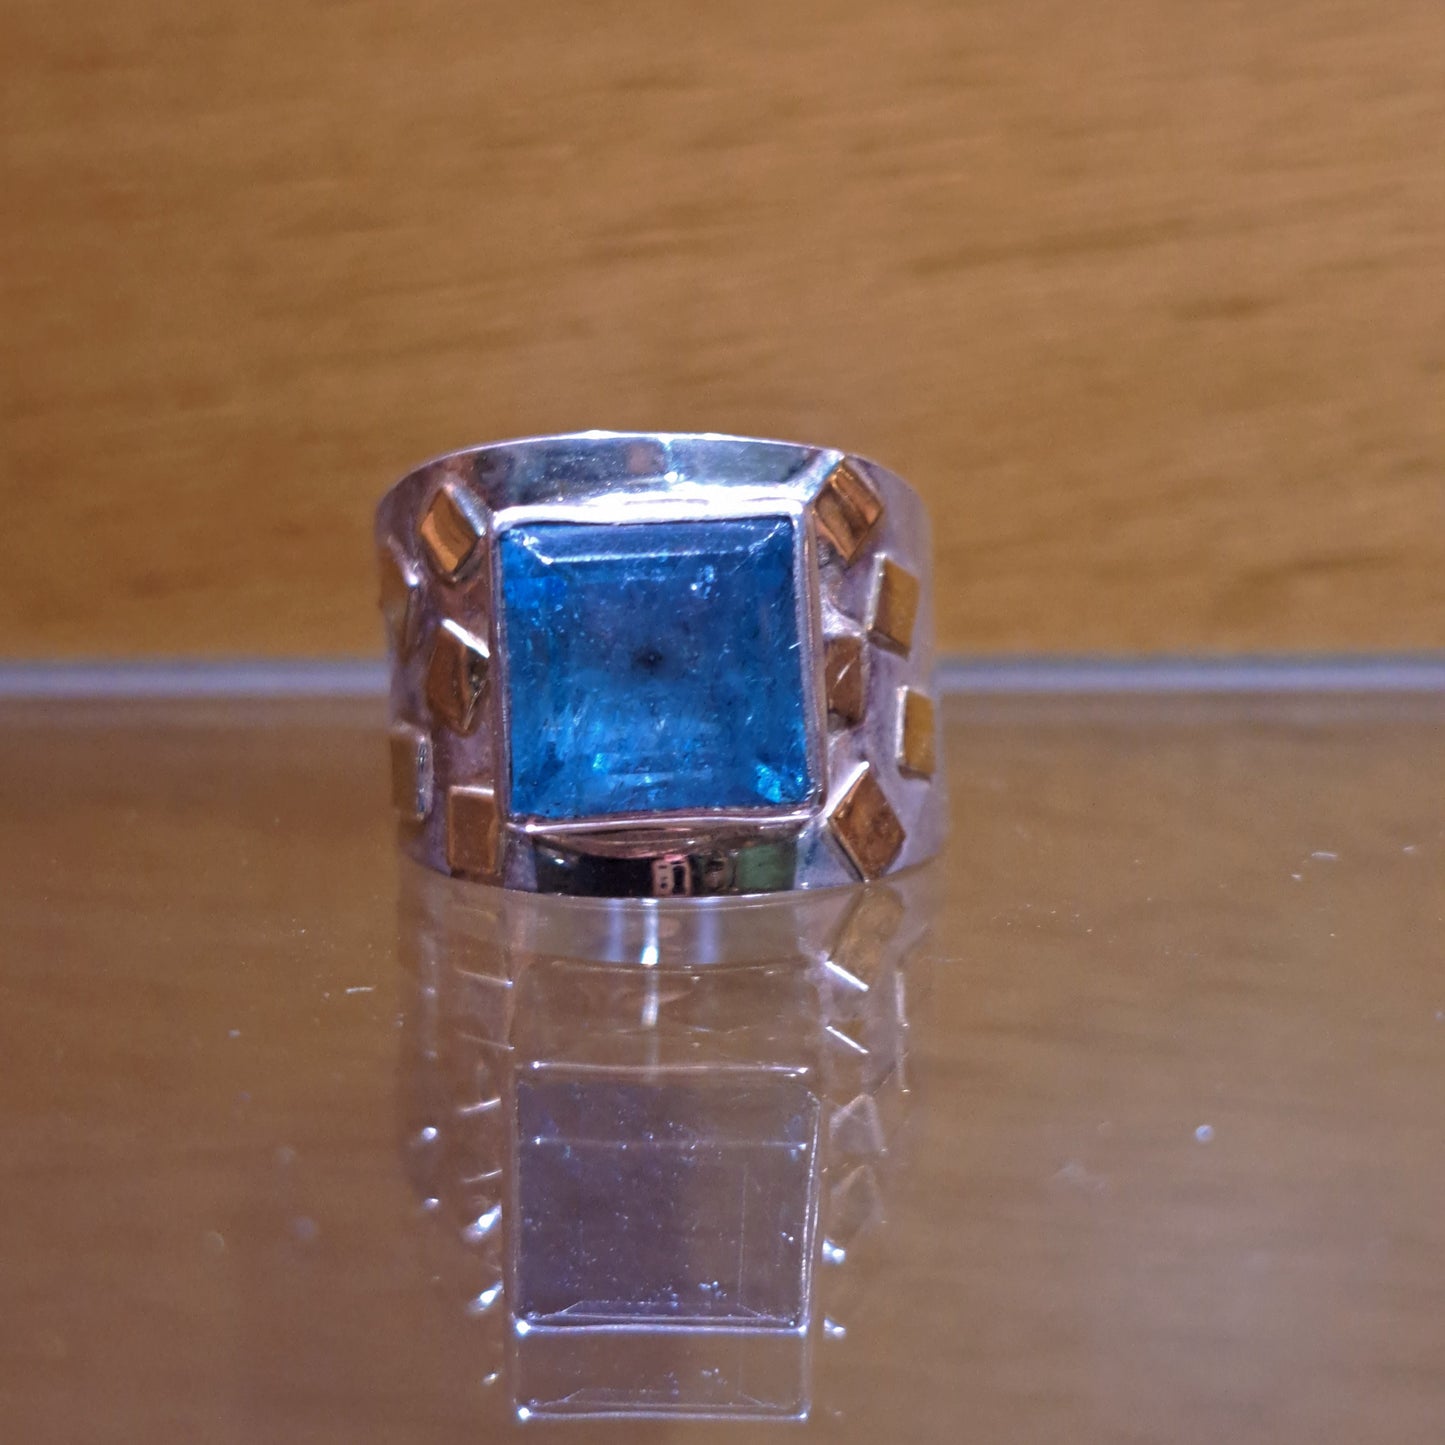 Handmade silver ring with aquamarine and 14K gold.